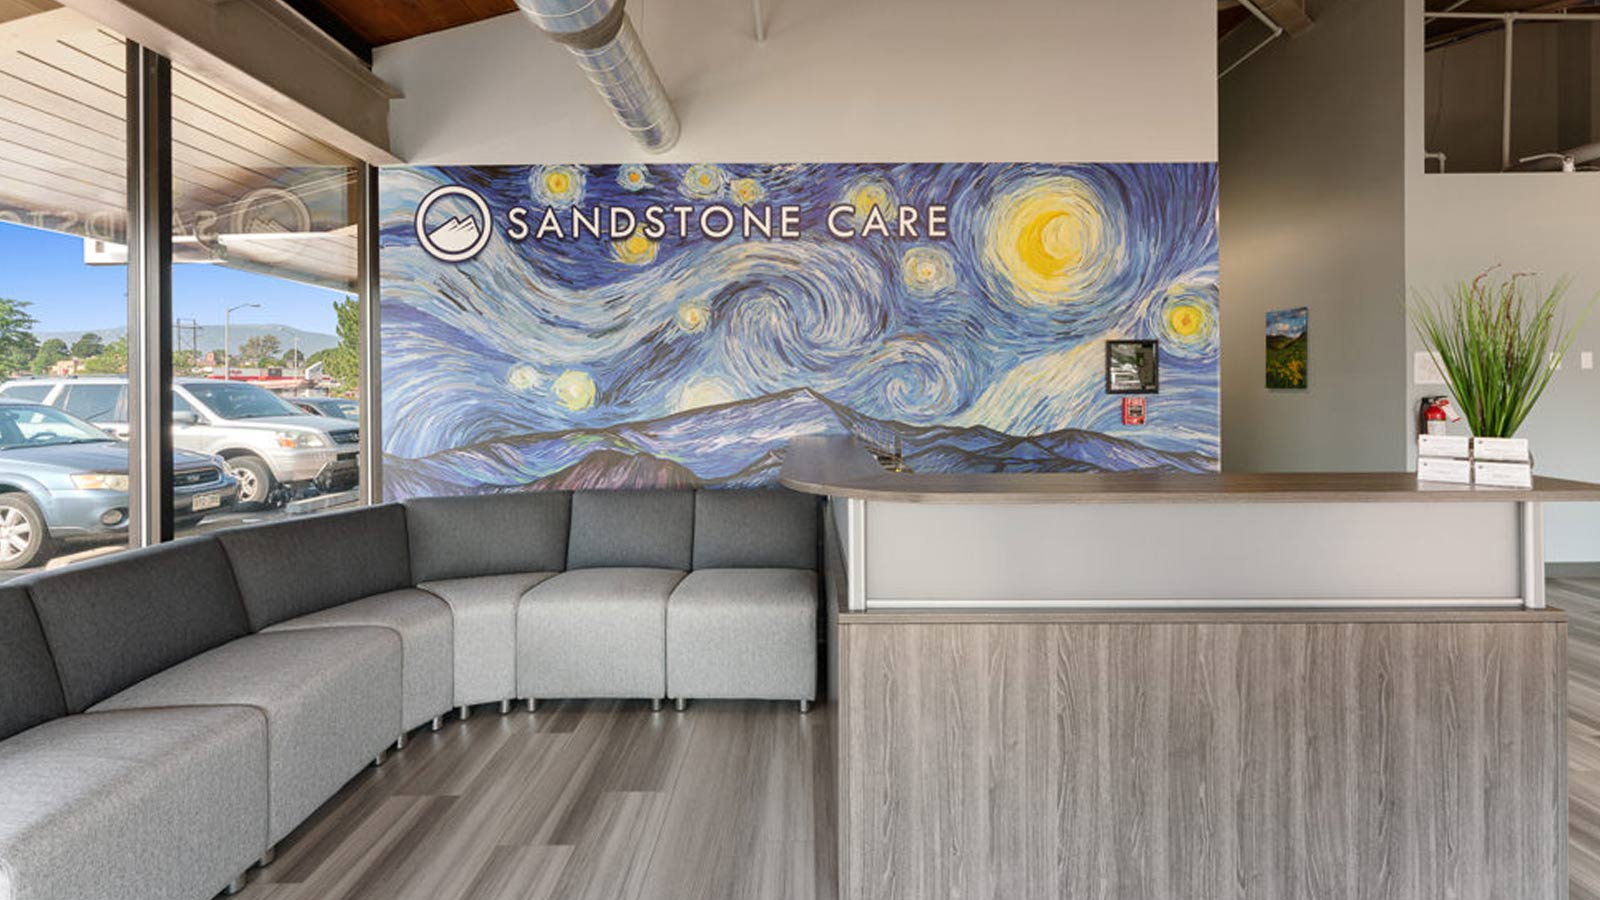 The reception area of a mental health center with a large, artistic mural and comfortable seating.